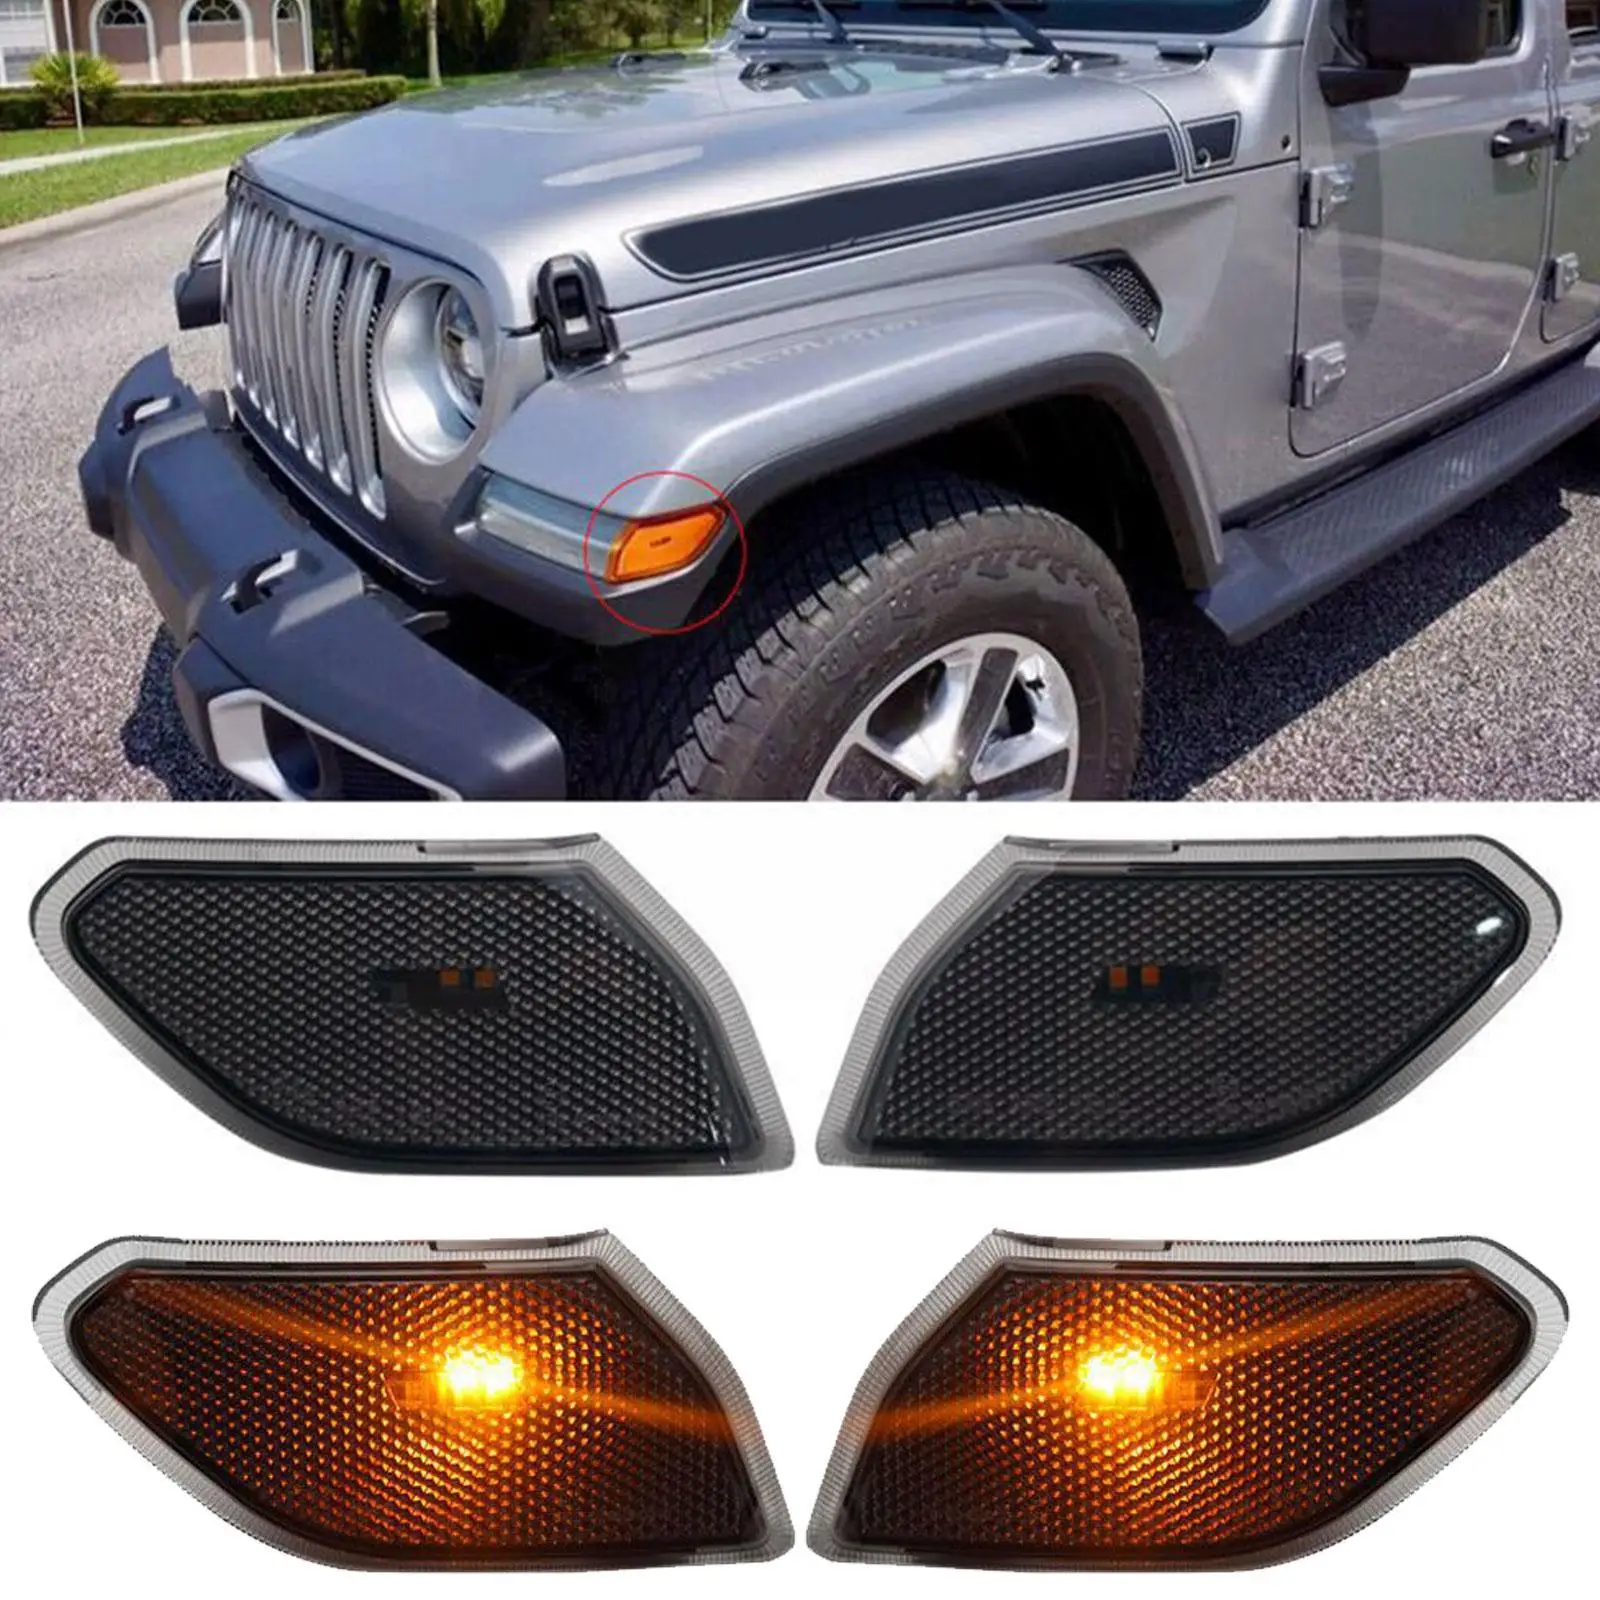 

2pcs Car Front Side Markers Amber LED Lights For Jeep wrangler JL 2018 2019 2020 Smoke Shell/Clear Shell G4H2